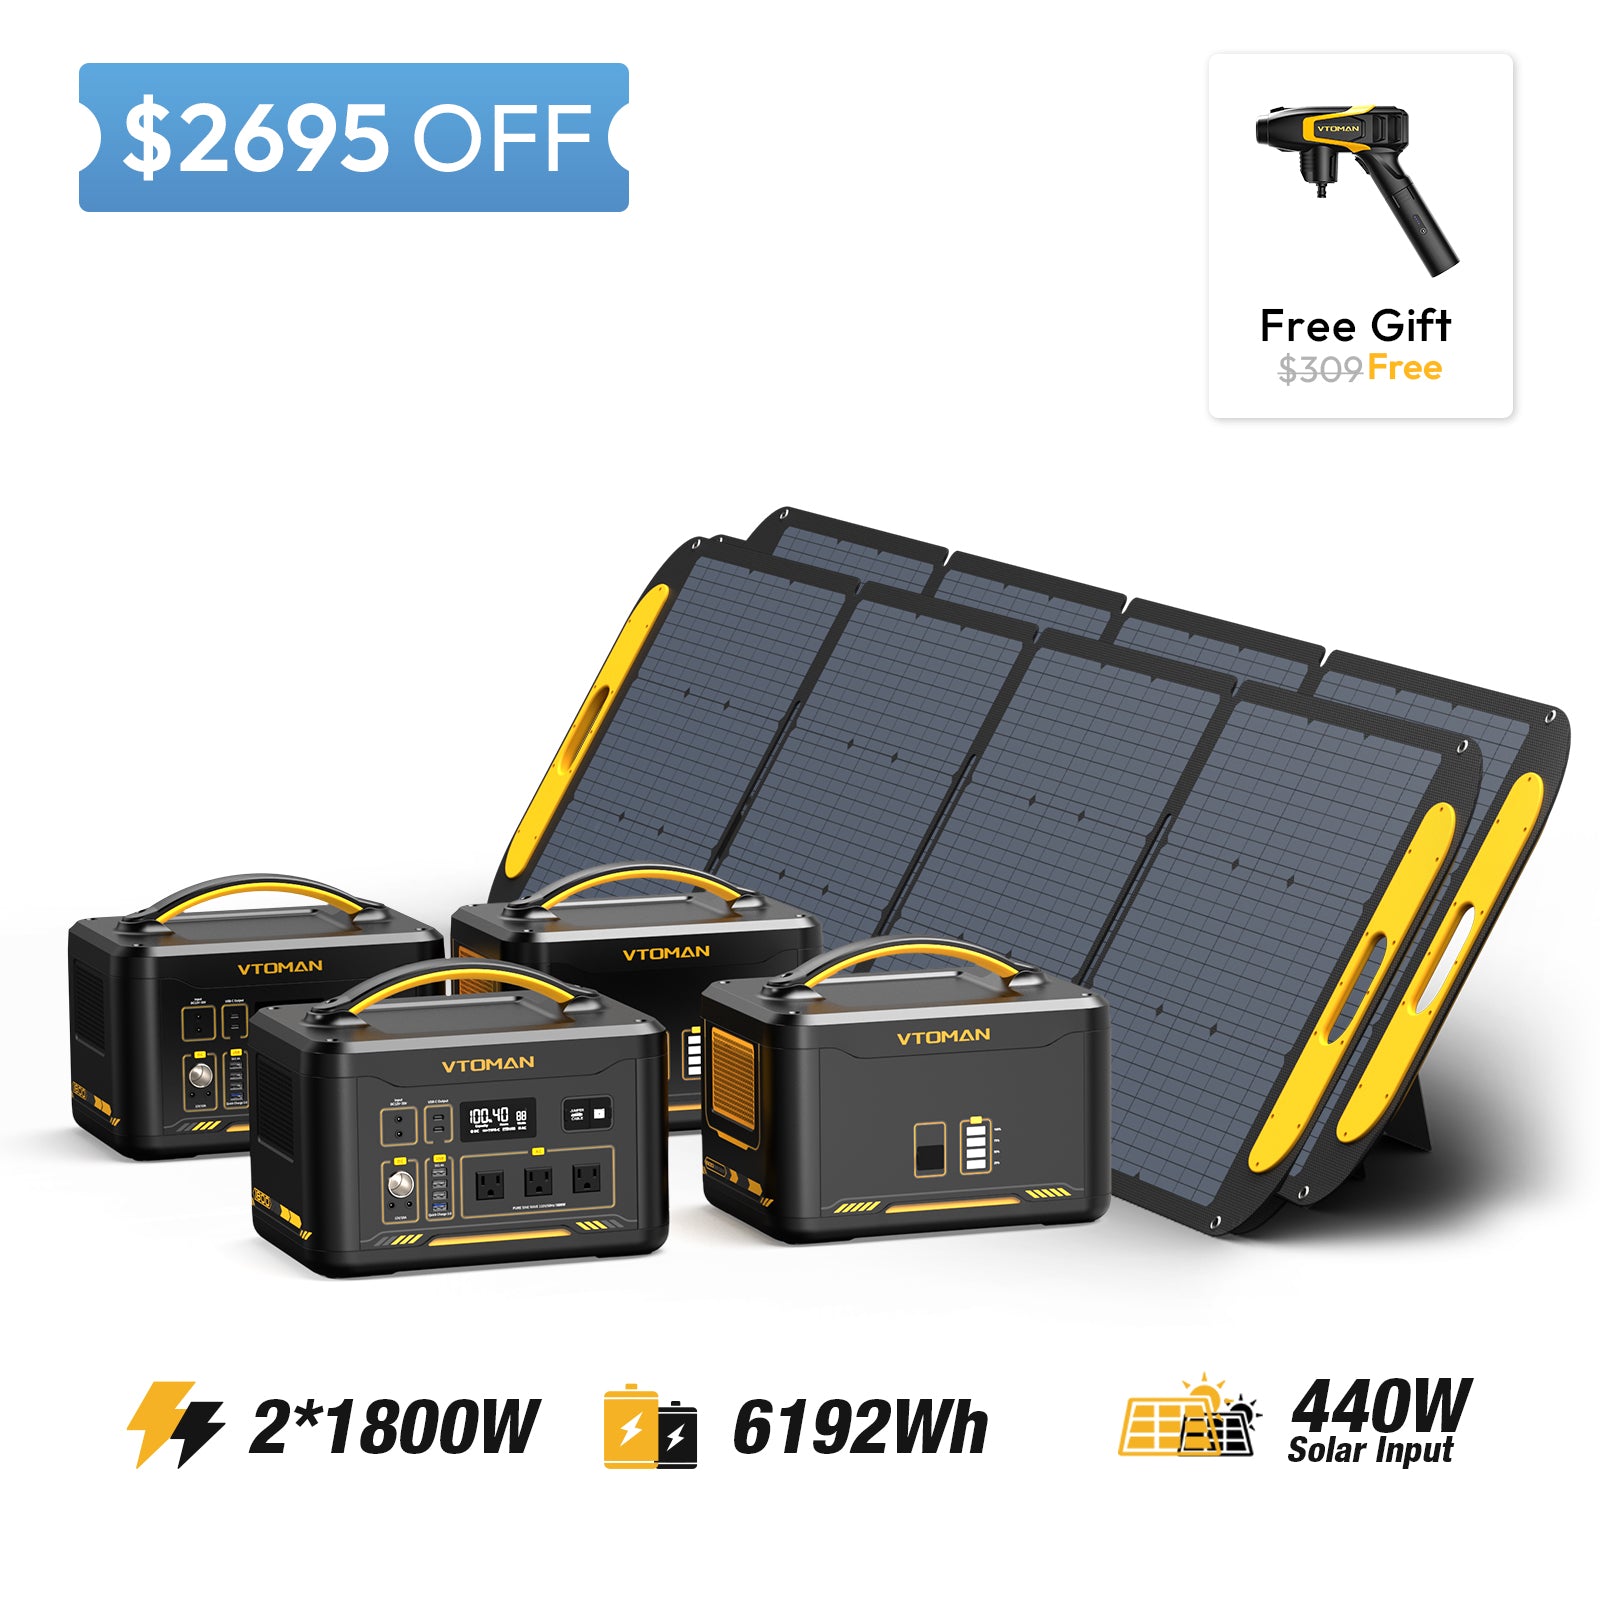 Jump 1800-2-1548Wh extra battery-2-220W solar panel-2 save $2695 in summer sale